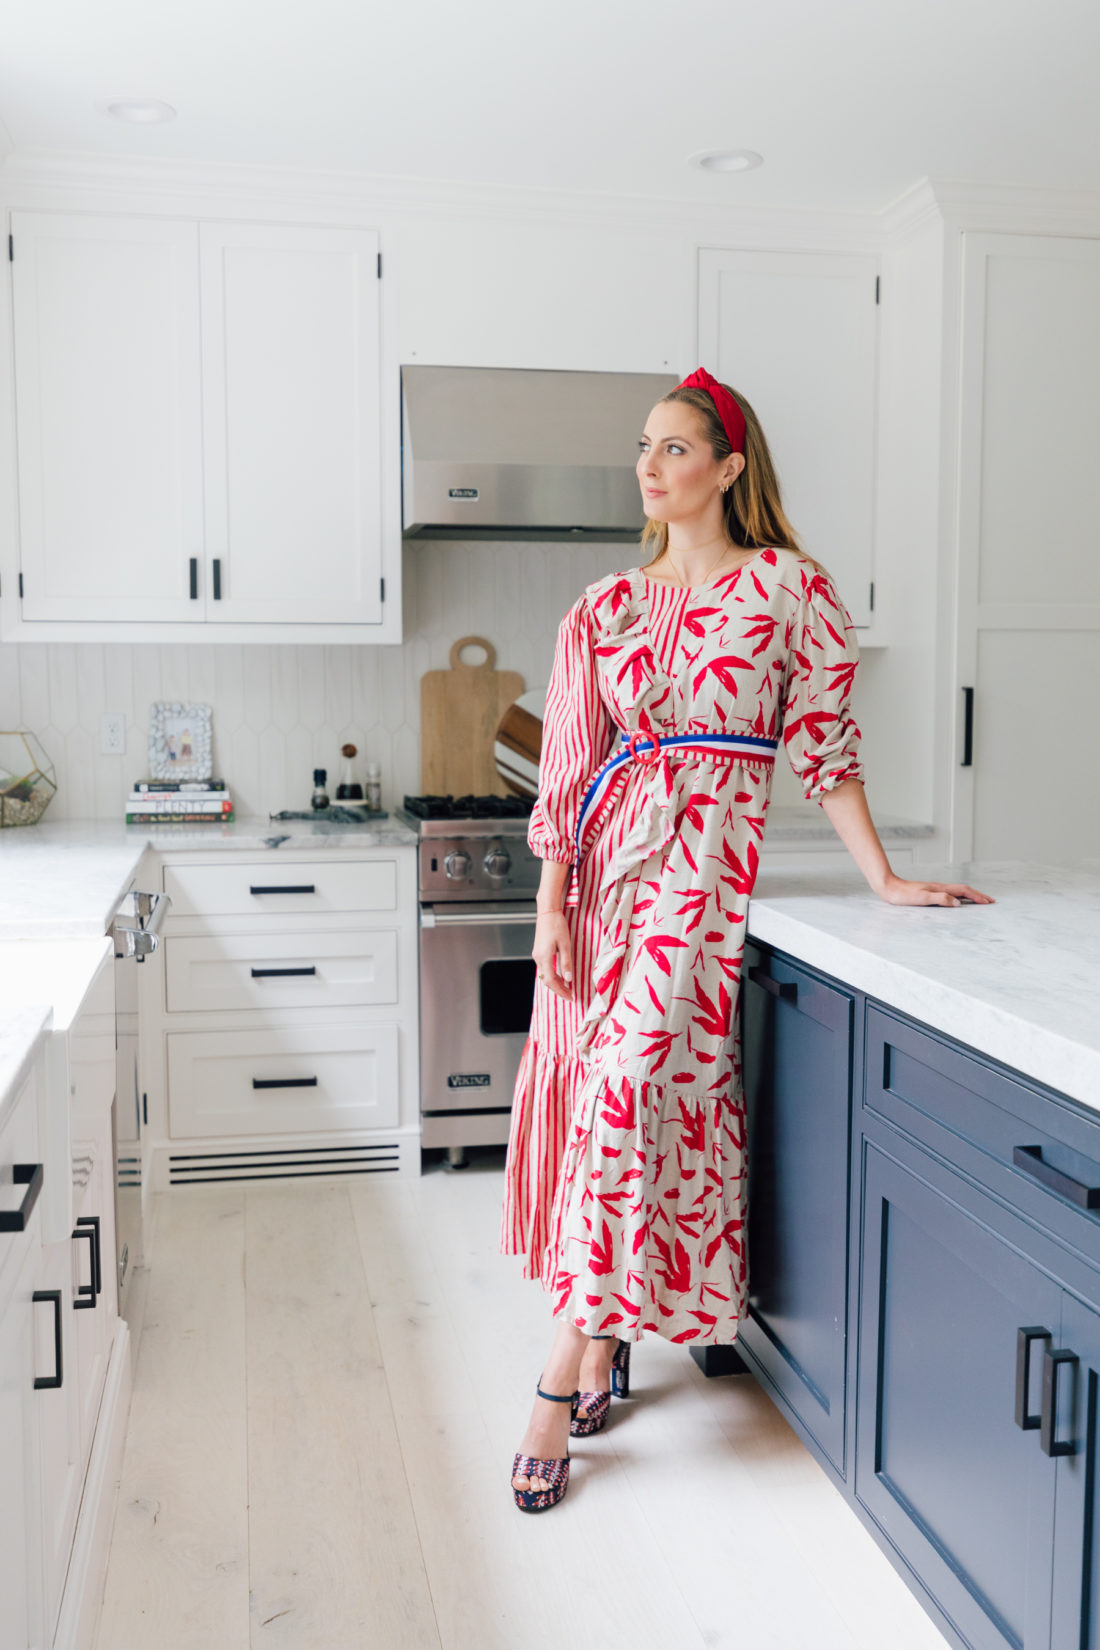 Eva Amurri Martino stands in the renovated, modern kitchen in her historic Connecticut home